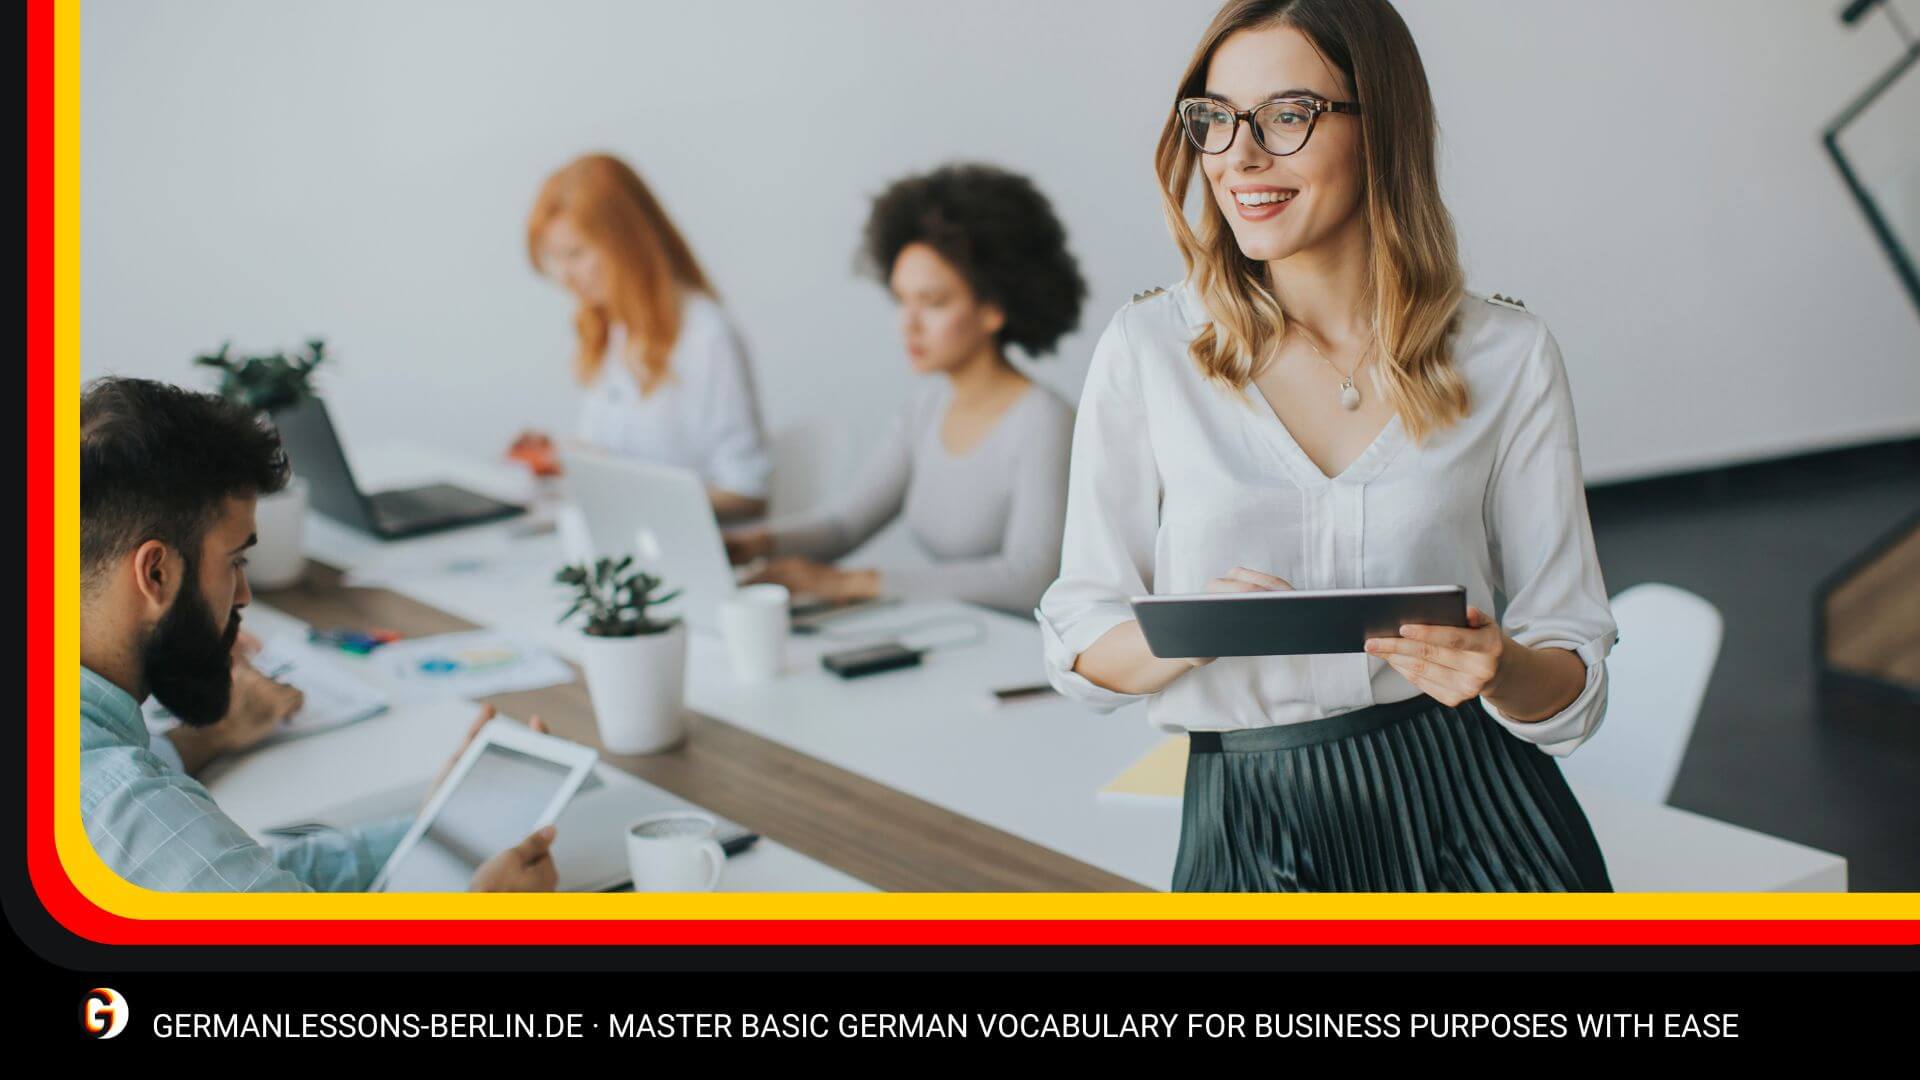 Master Basic German Vocabulary for Business Purposes with Ease